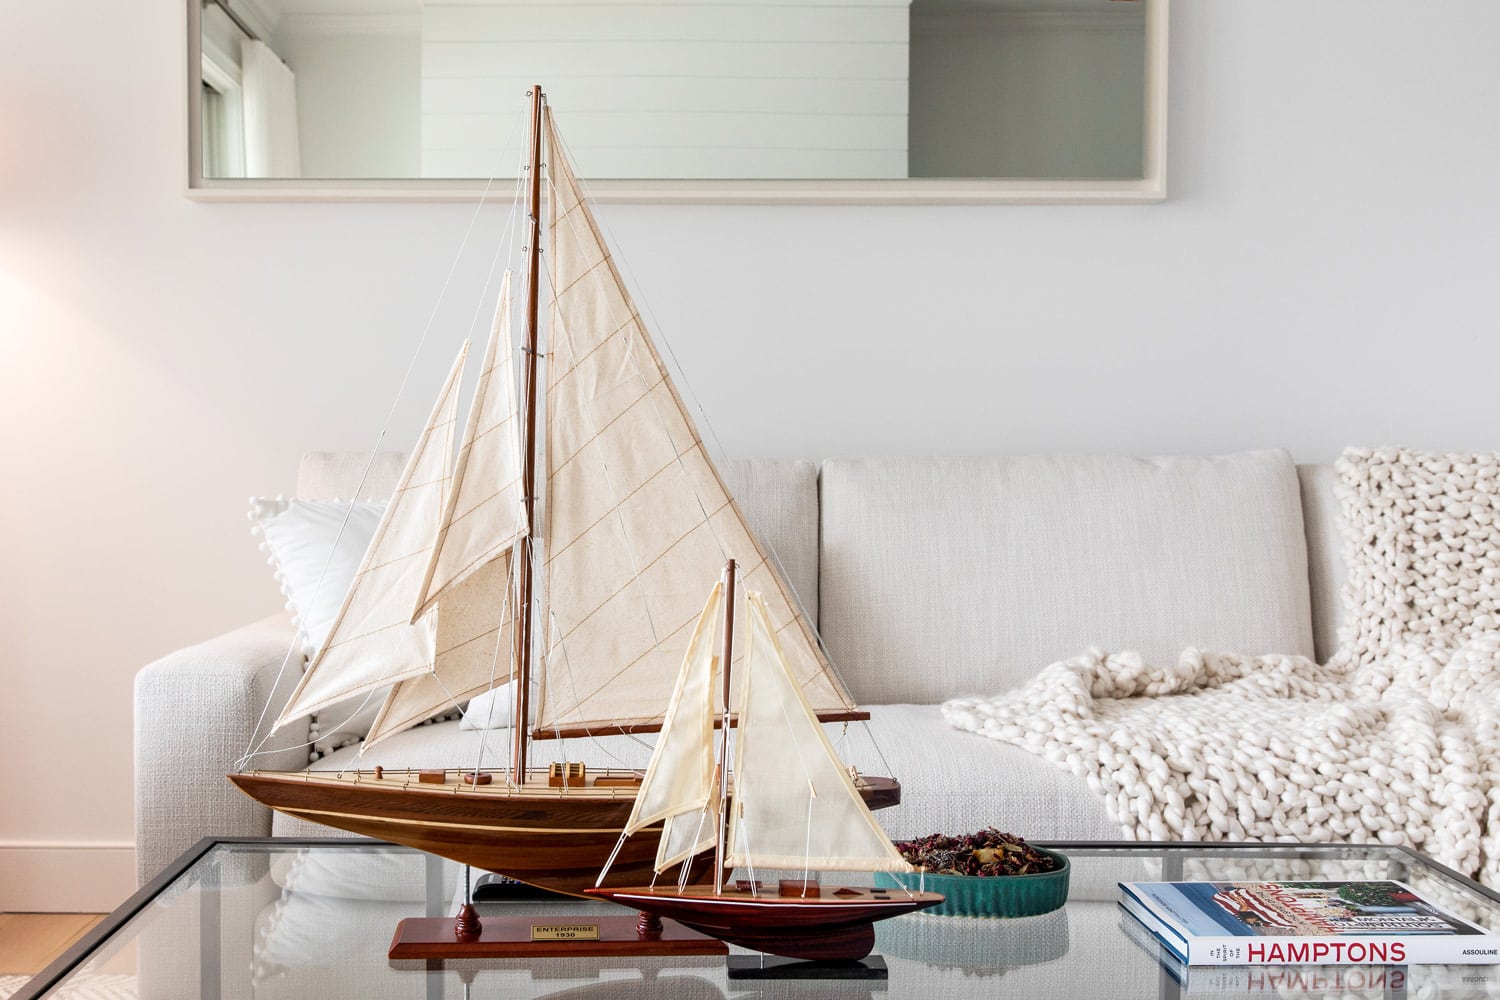 Living room decor in a Hamptons boathouse designed by Annette Jaffe Interiors